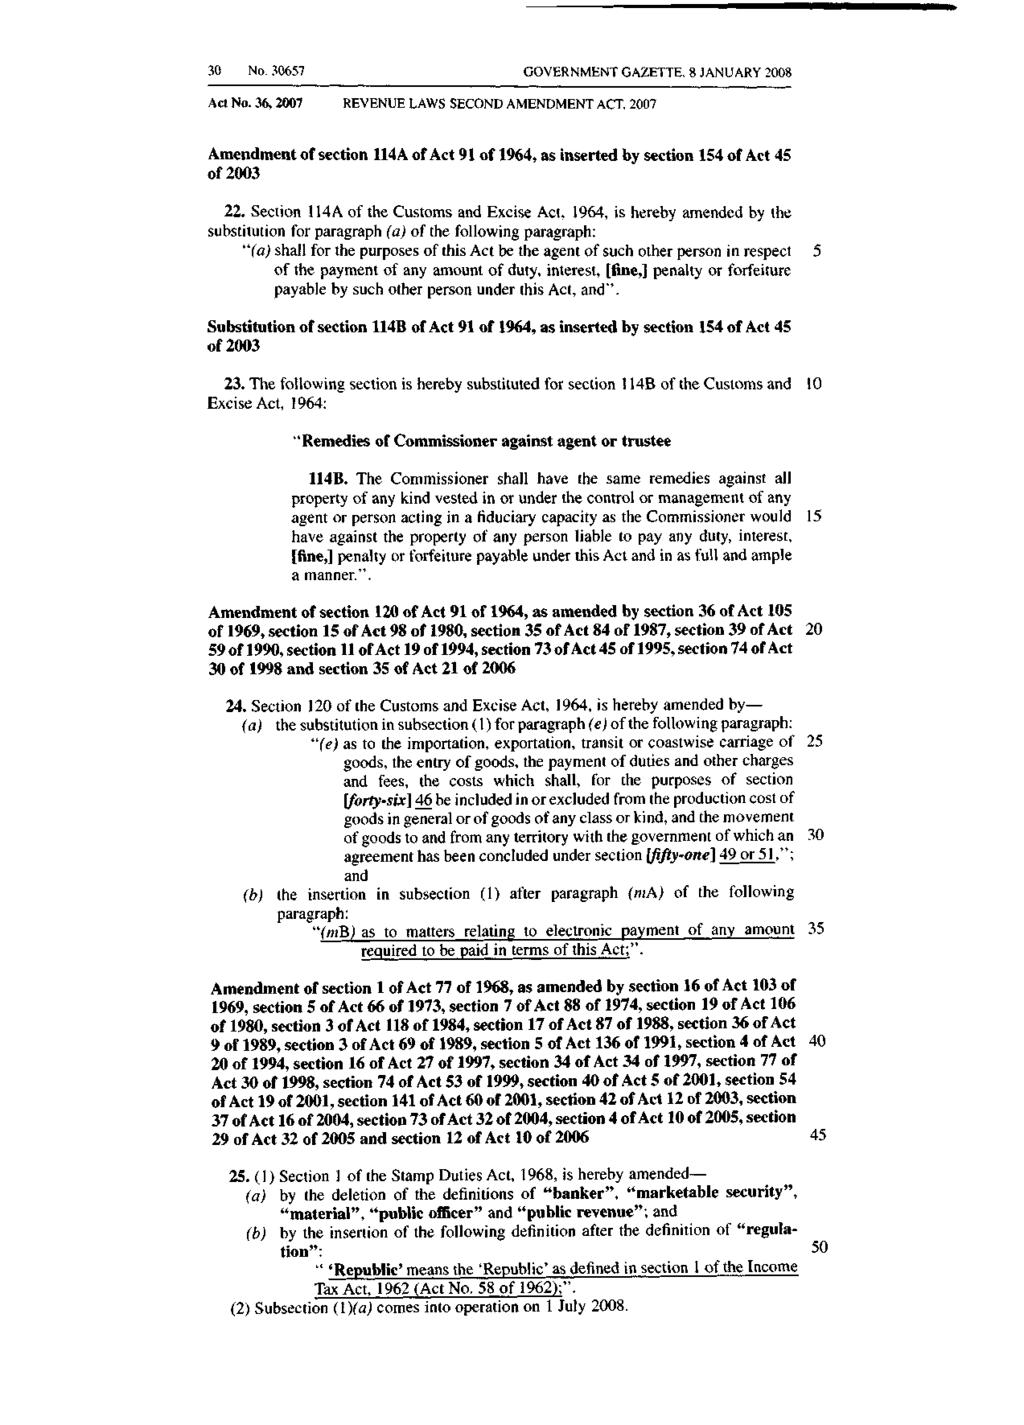 Amendment of section 114A of Act 91 of 1964, as inserted by section 154 of Act 45 of 2003 22.